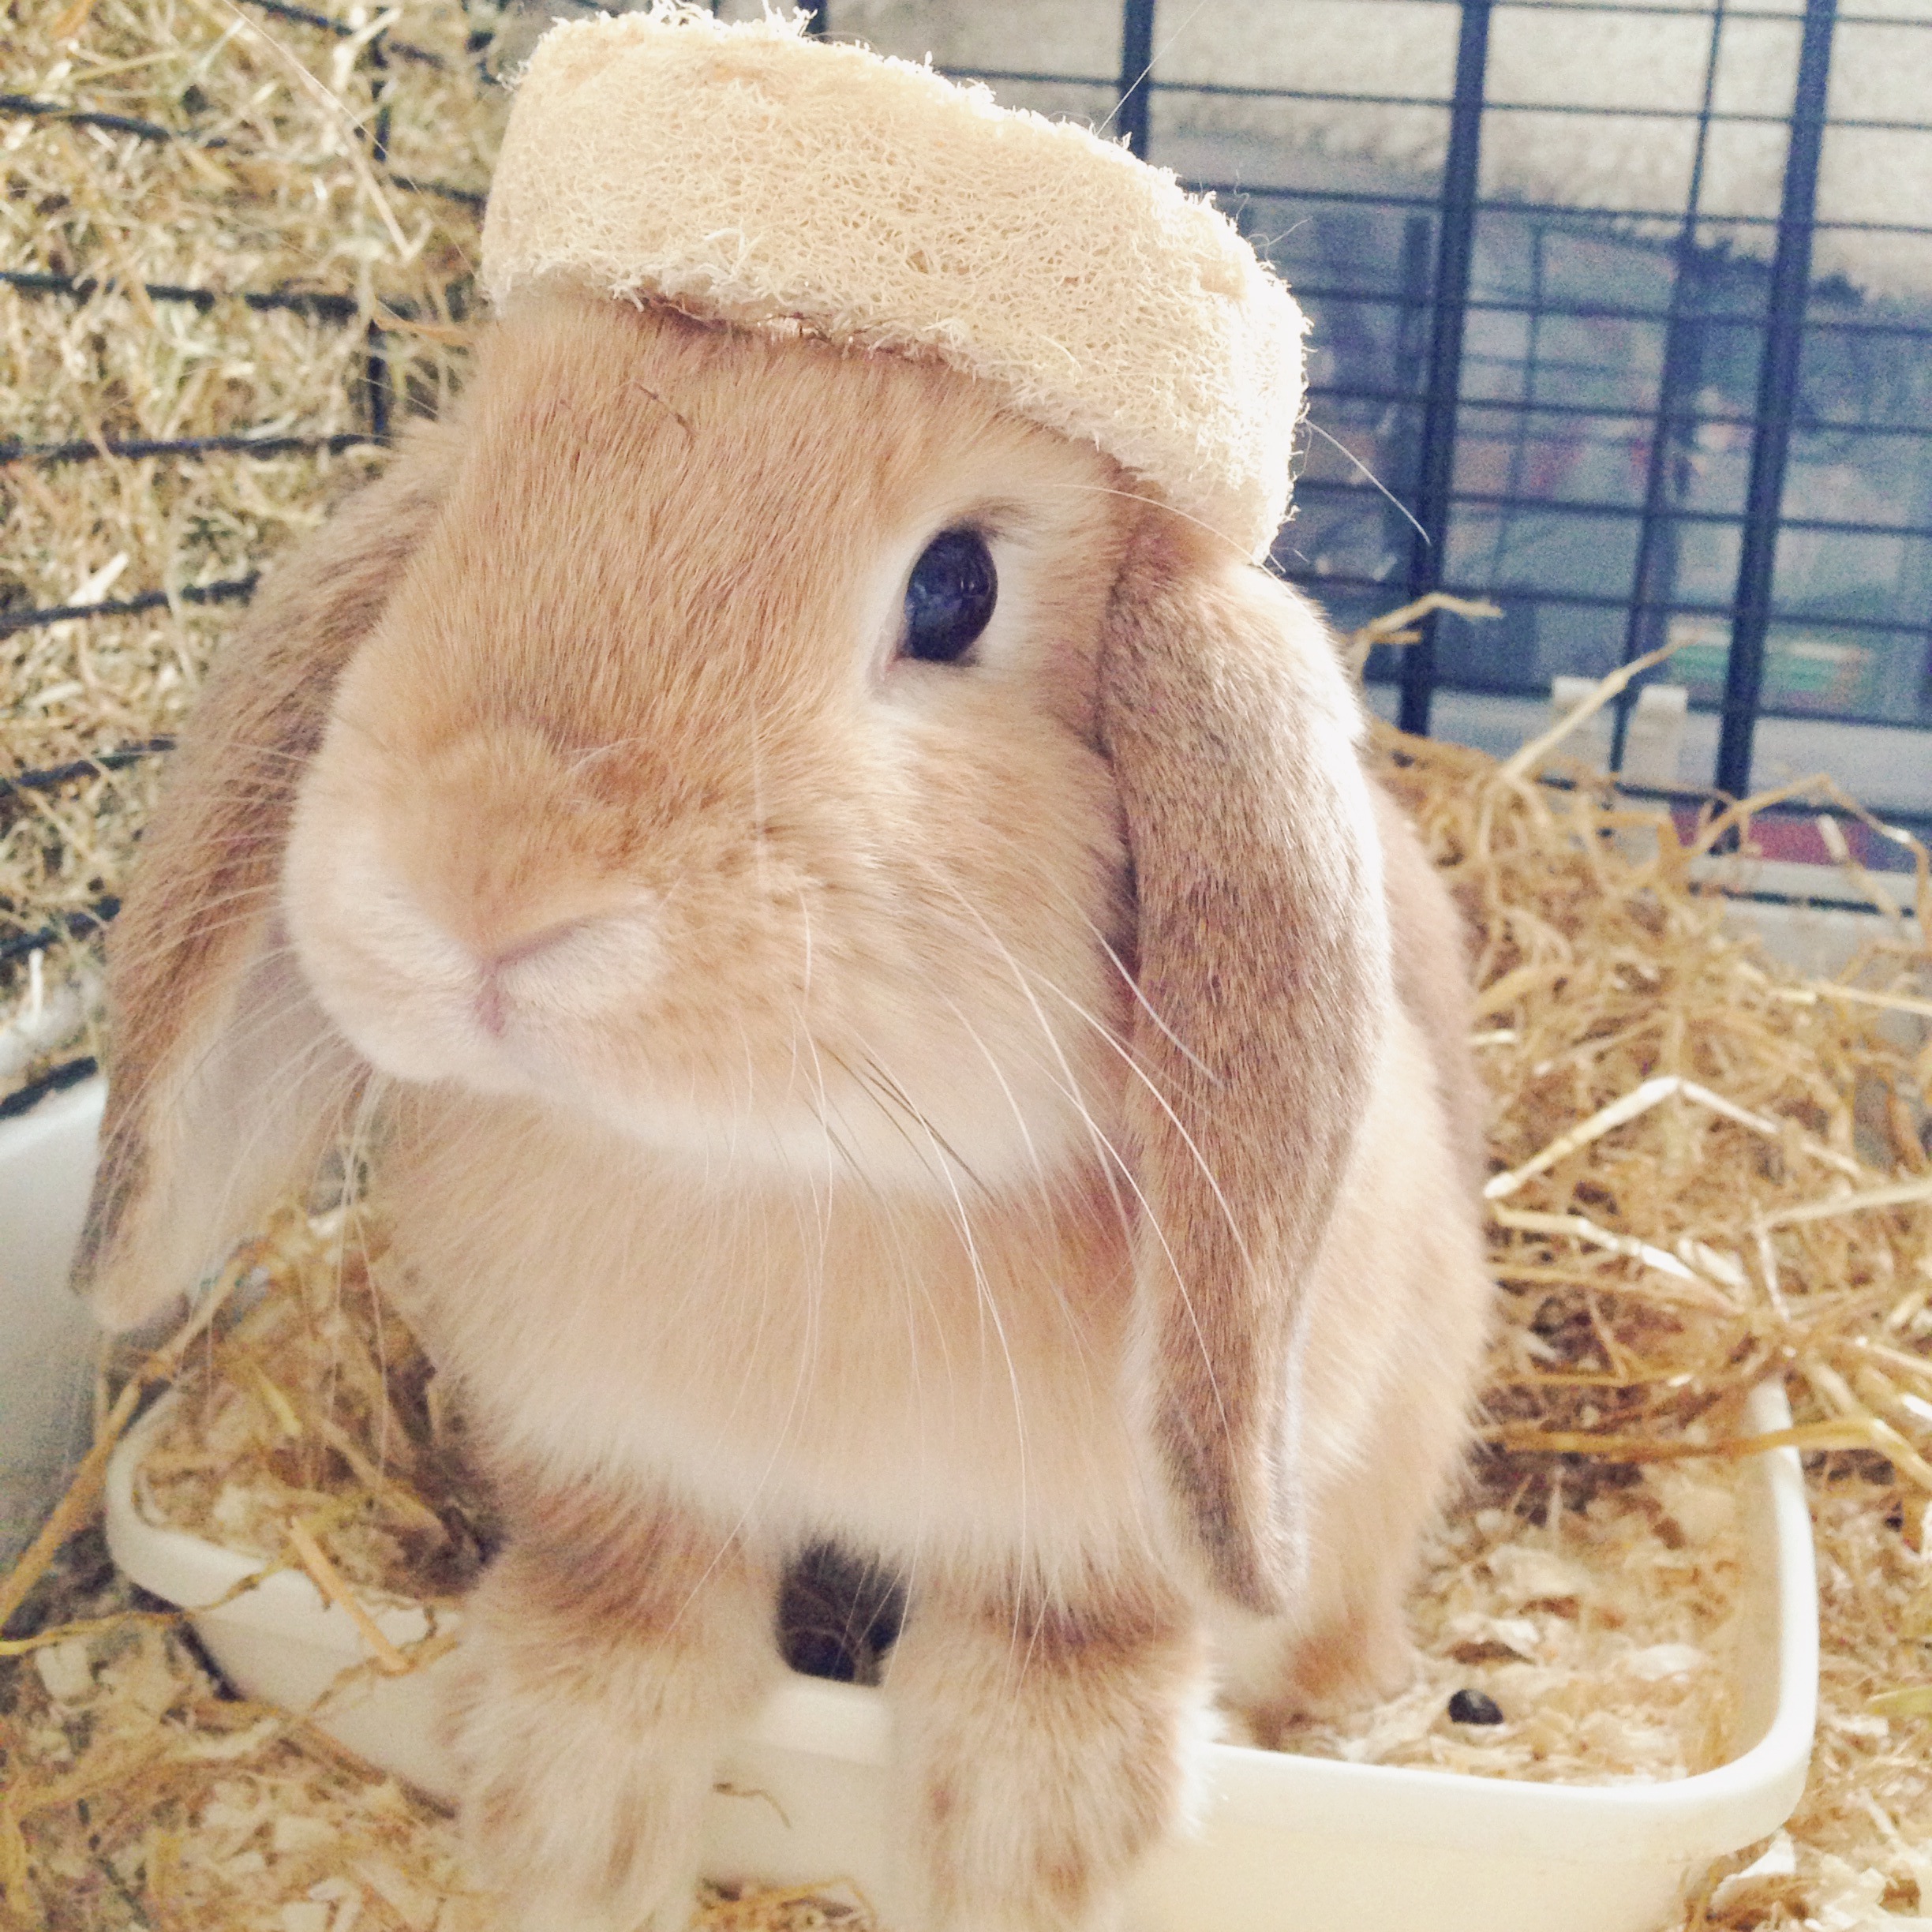 Bunny Wears His Toy as a Crown